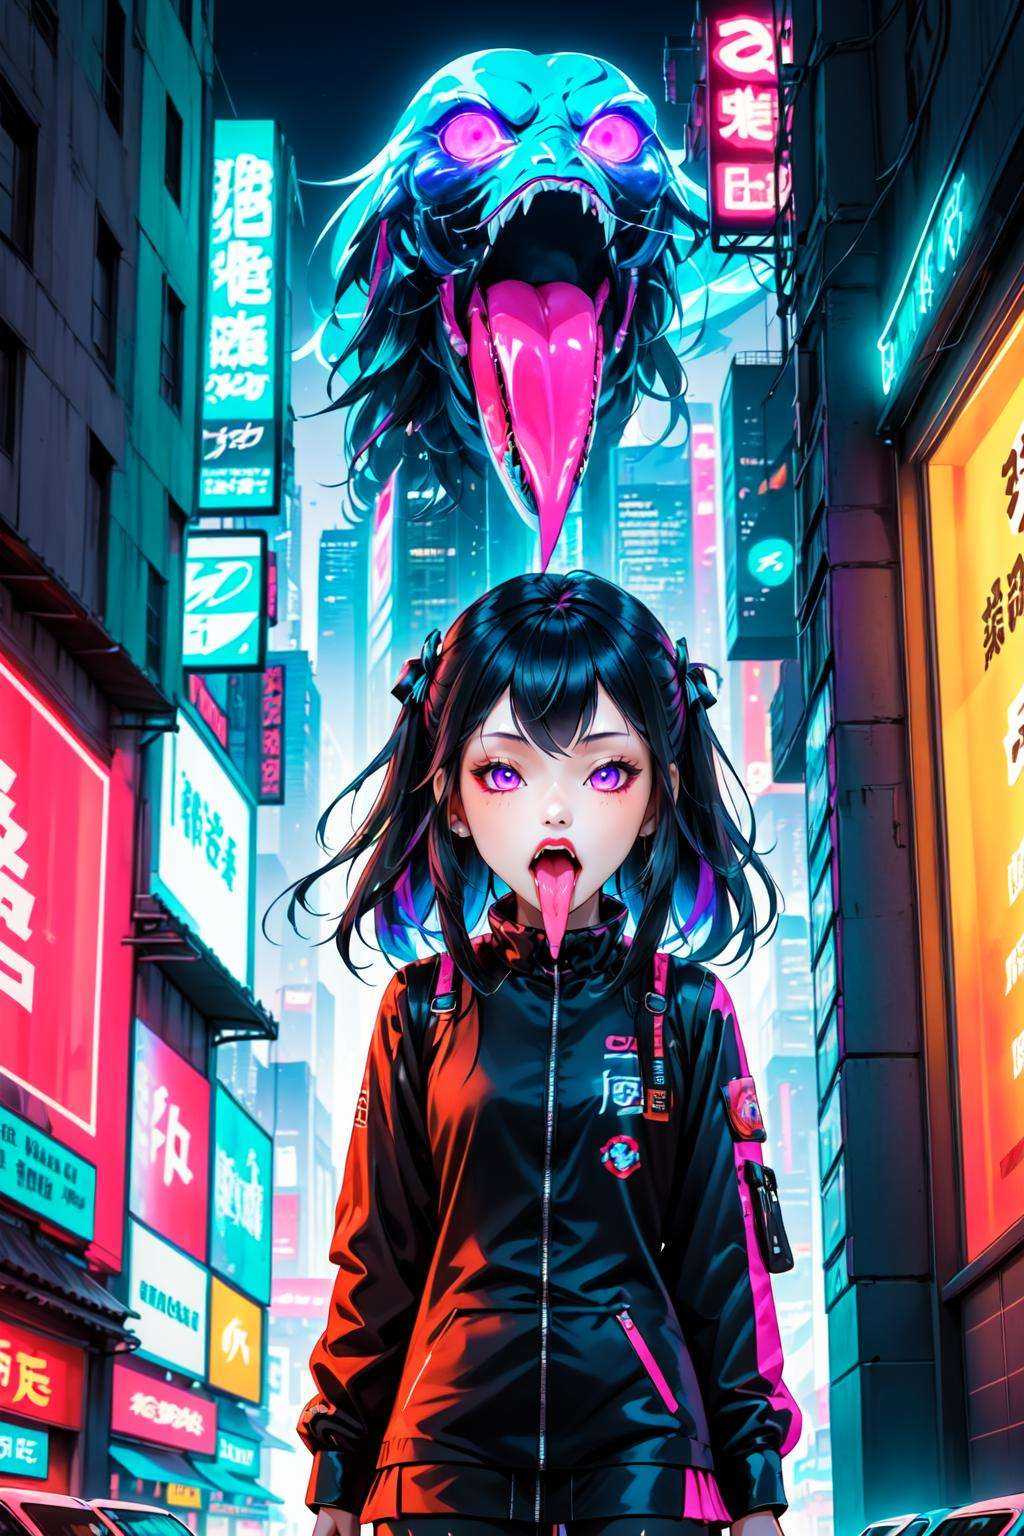 ((masterpiece)),((best quality)),8k,high detailed,ultra-detailed,illustration,(1girl:2),(gossghost),(long tongue),tongure out,Futuristic urban setting with a Chinese twist, Phantom hackers, Holographic avatars, Futuristic neon cityscape, Urban sprawl, Cyberspace showdown, Digital effects and distortions, Glowing neon signs, Chinese calligraphy merging with digital aesthetics, A virtual world clash between hackers and avatars,<lora:ChangSheG_V2:1>,